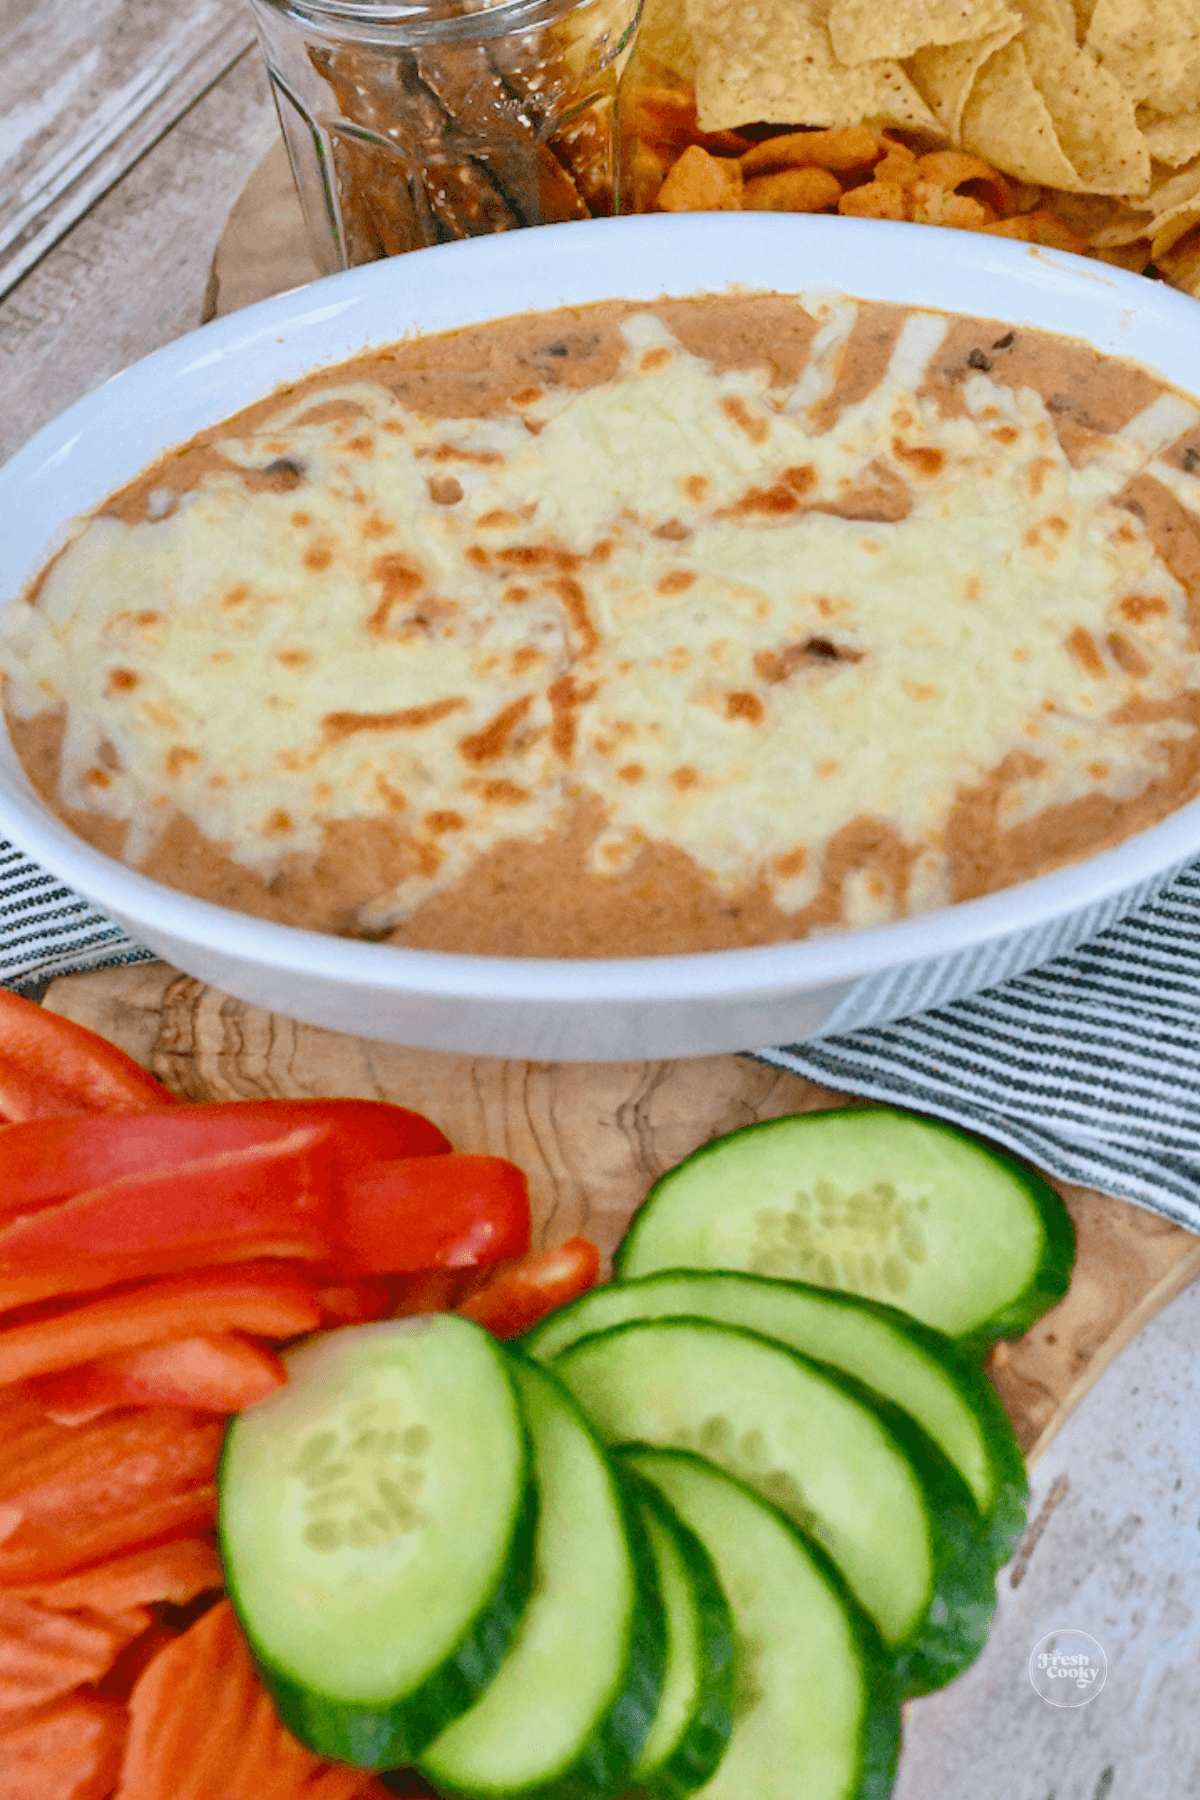 Easy 3 ingredient chili cheese dip with veggies for a low carb appetizer.